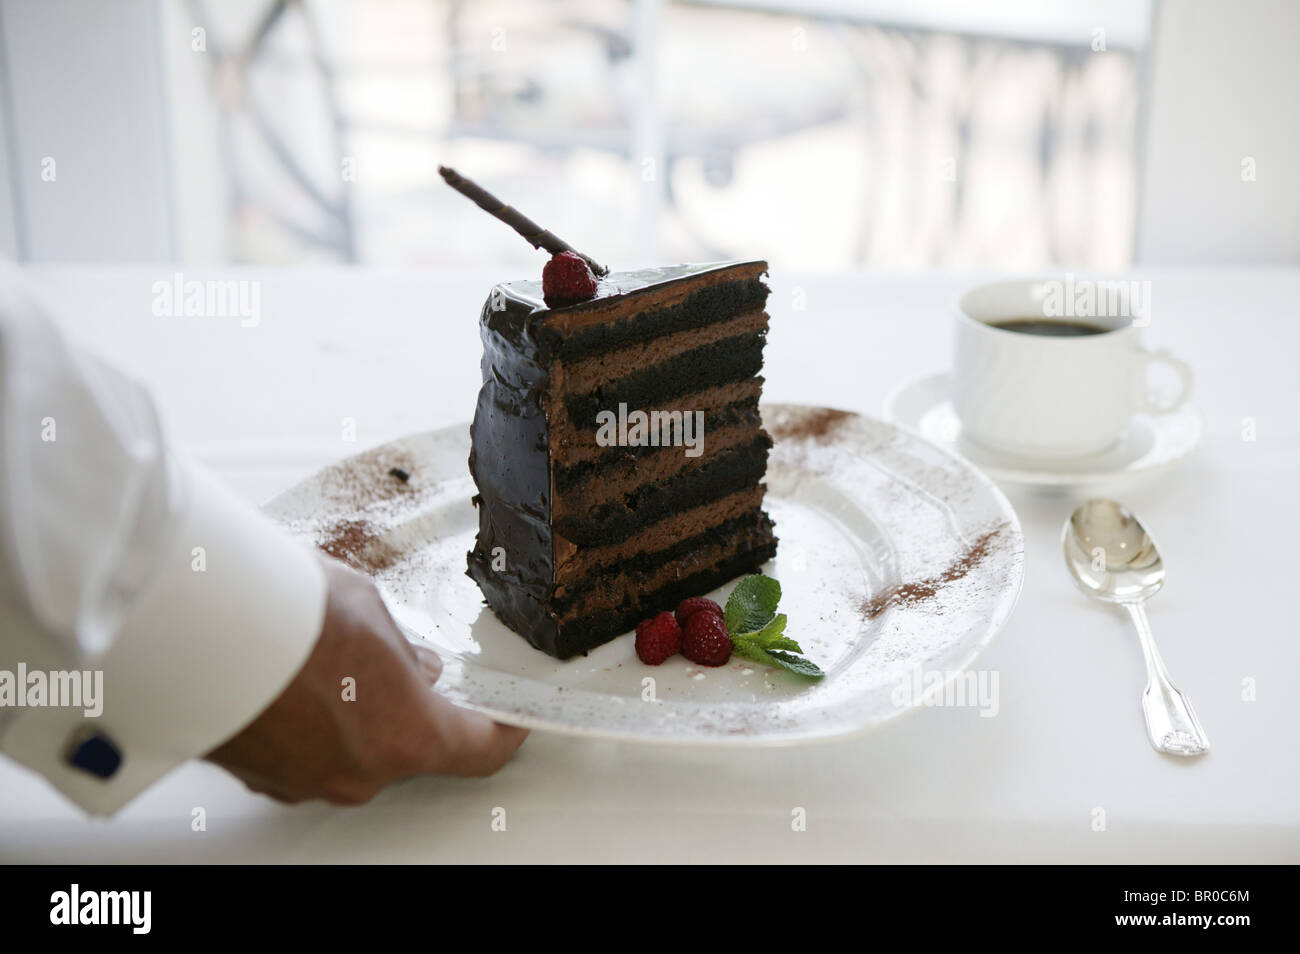 Waiter serving a slice of chocolate cake. Stock Photo